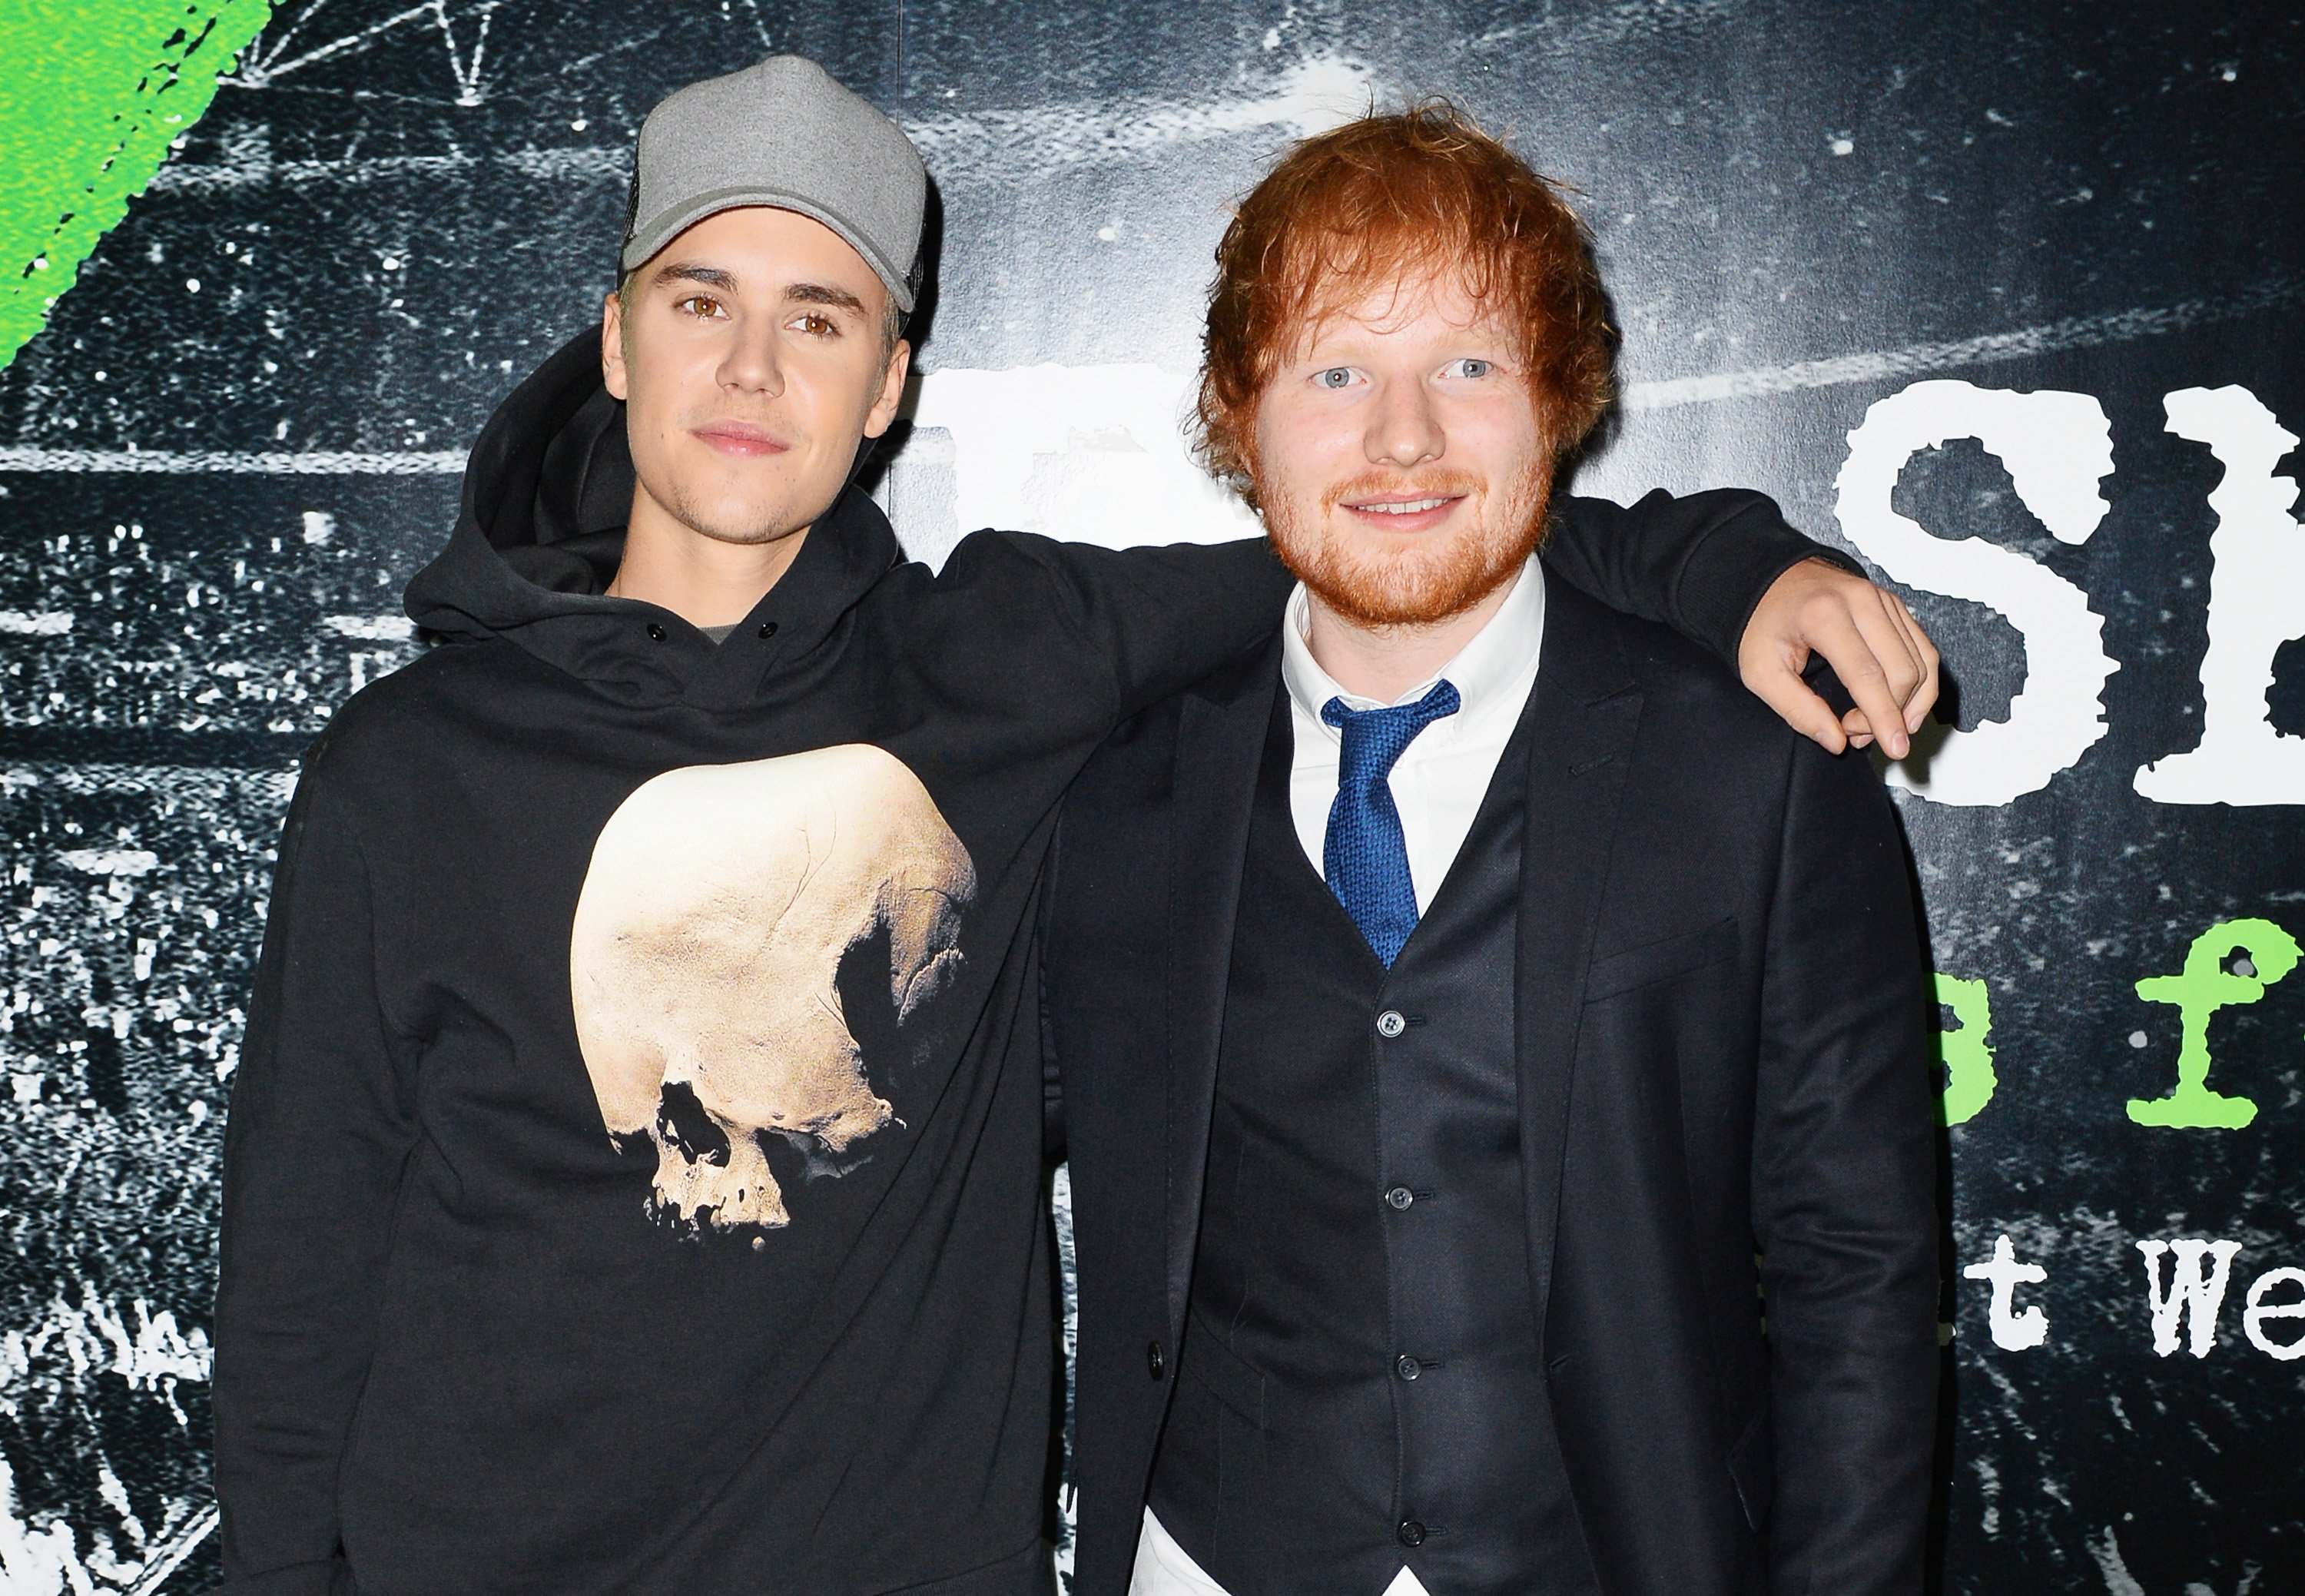 Justin Bieber and Ed Sheeran with a black background